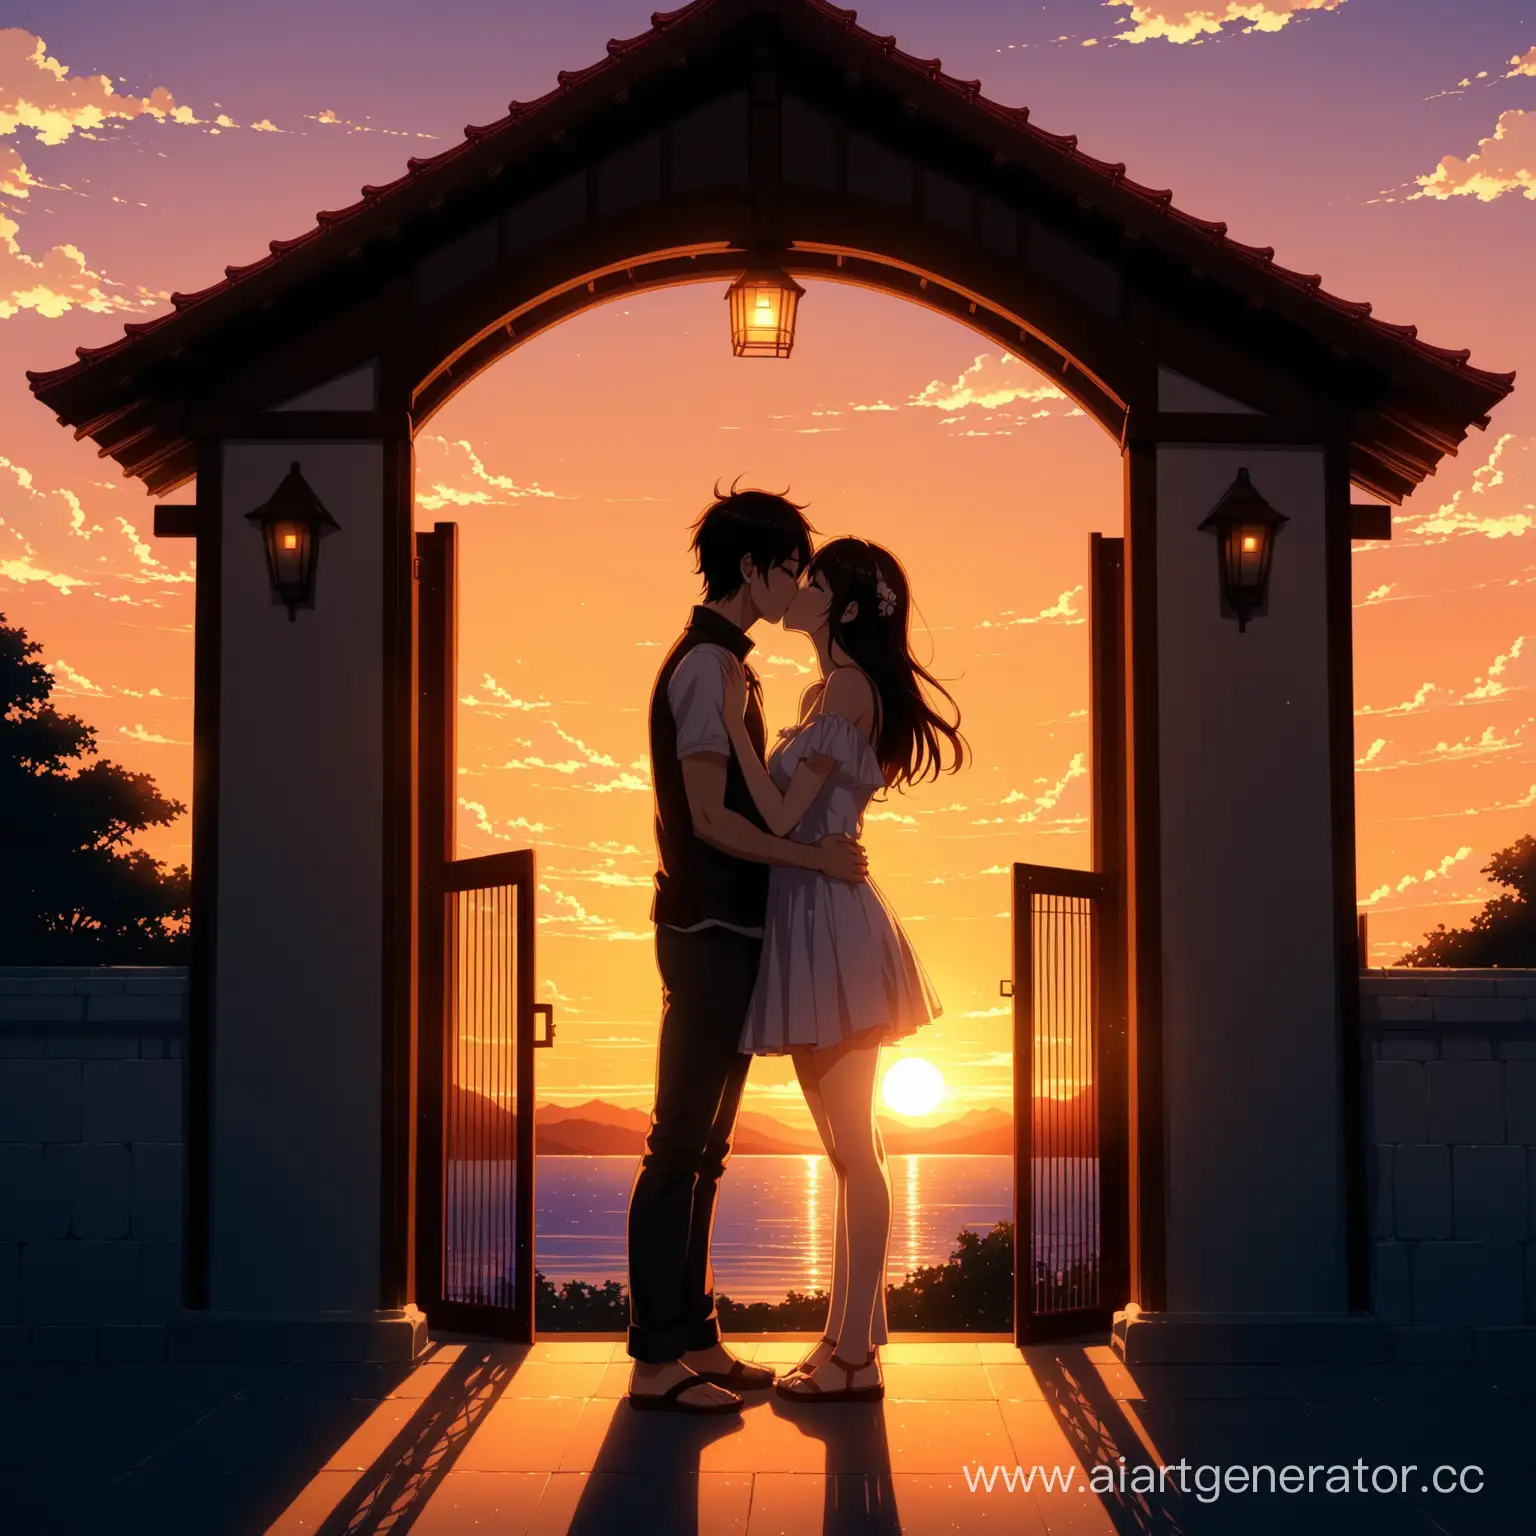 Romantic-Anime-Couple-Kissing-at-Sunset-by-the-Entrance